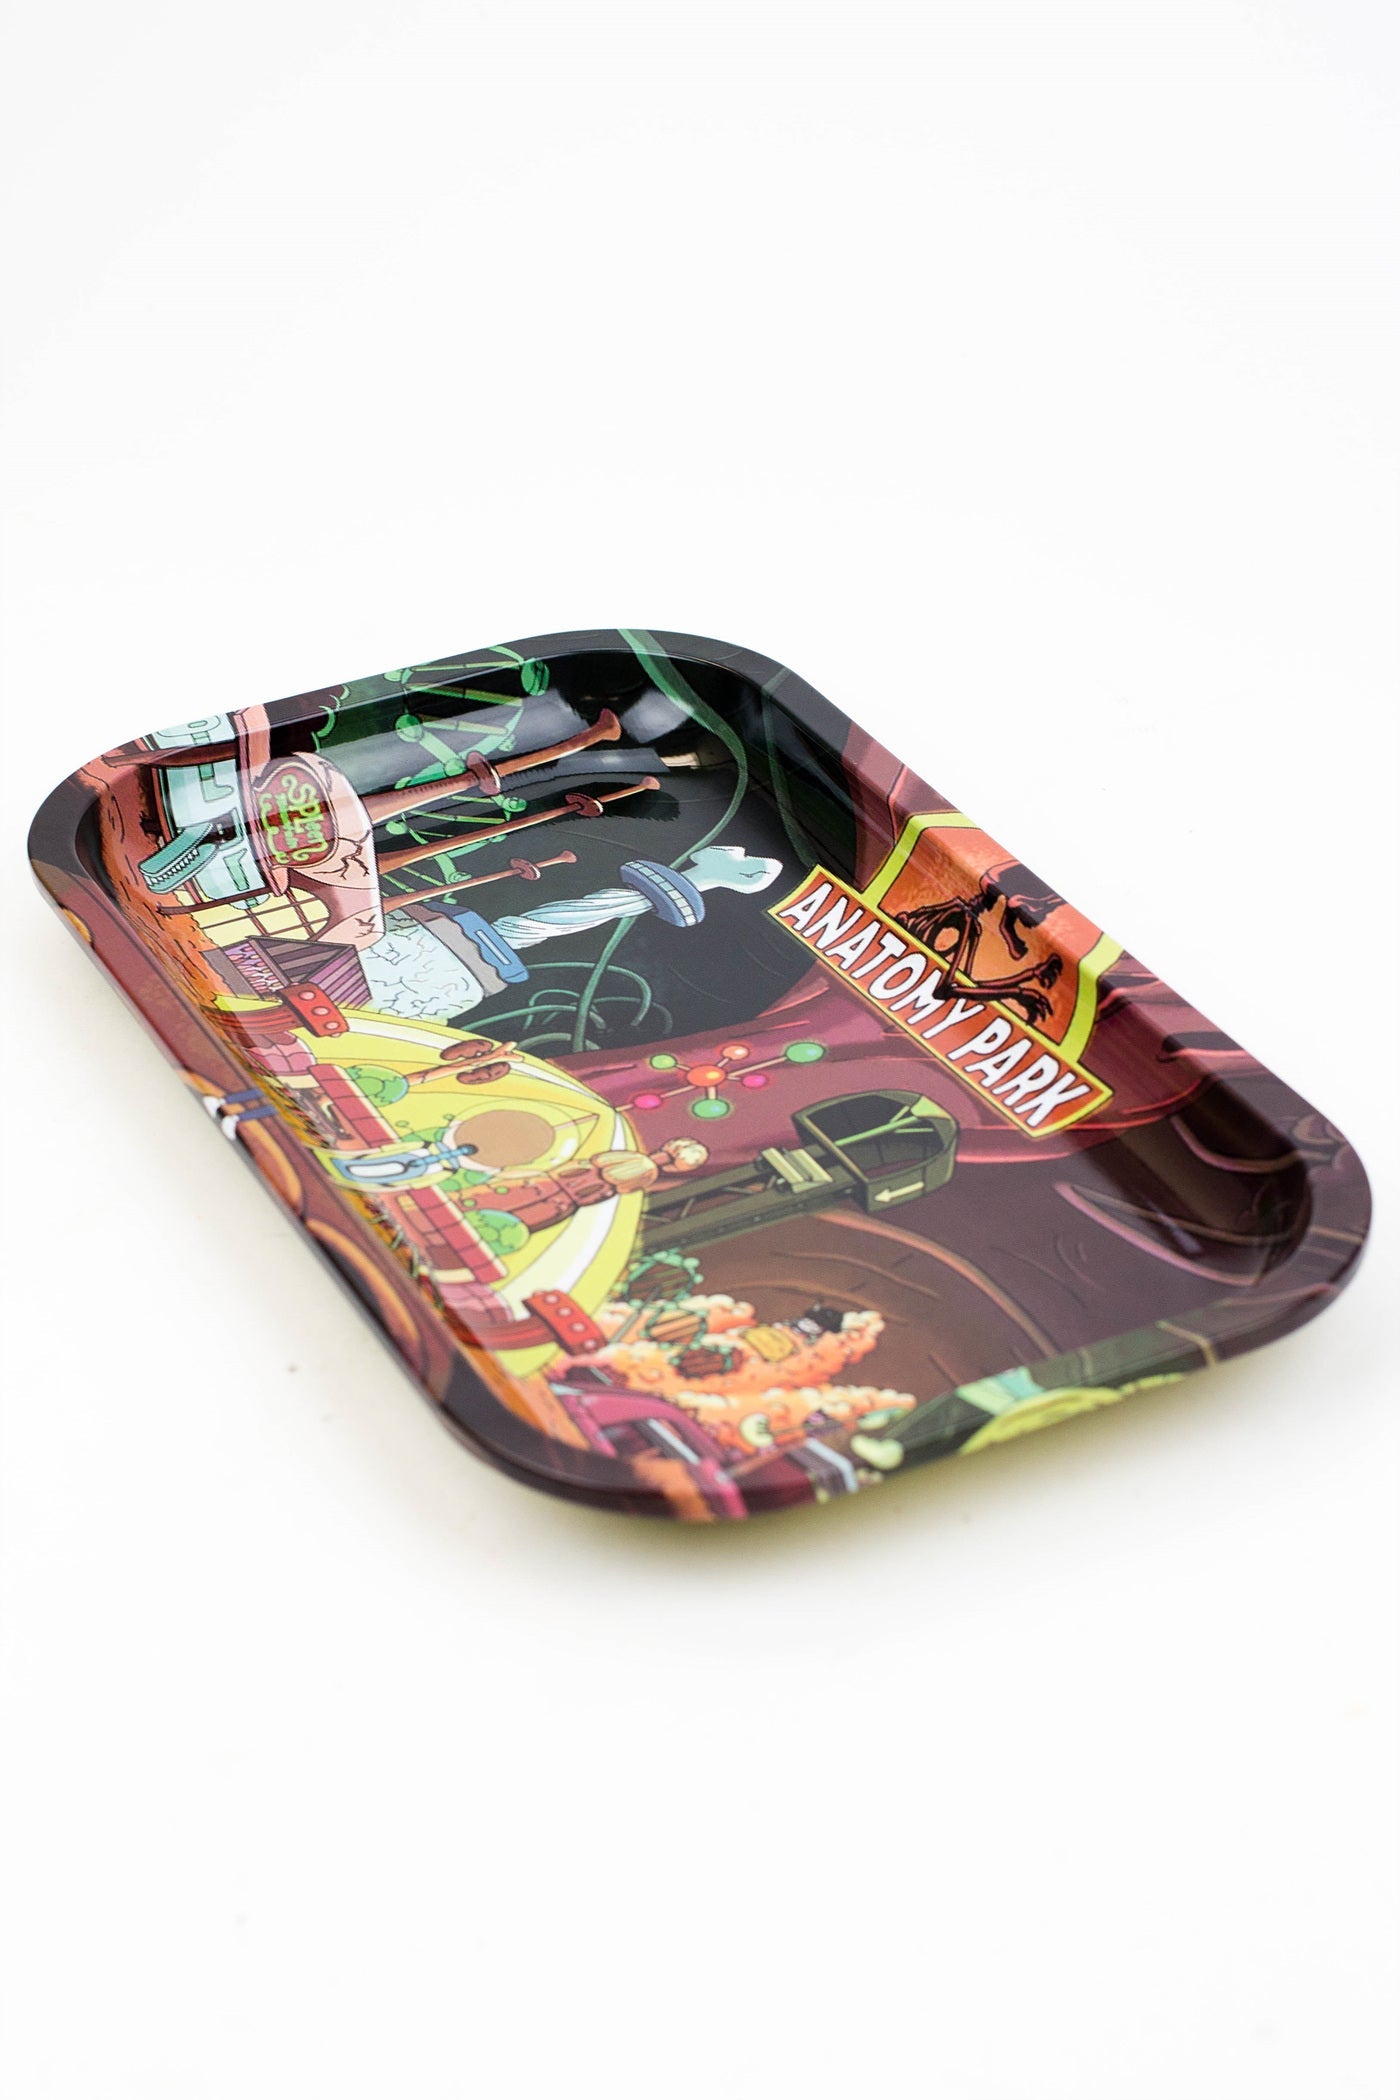 Cartoon Medium Rolling Tray with Magnetic Lid_3